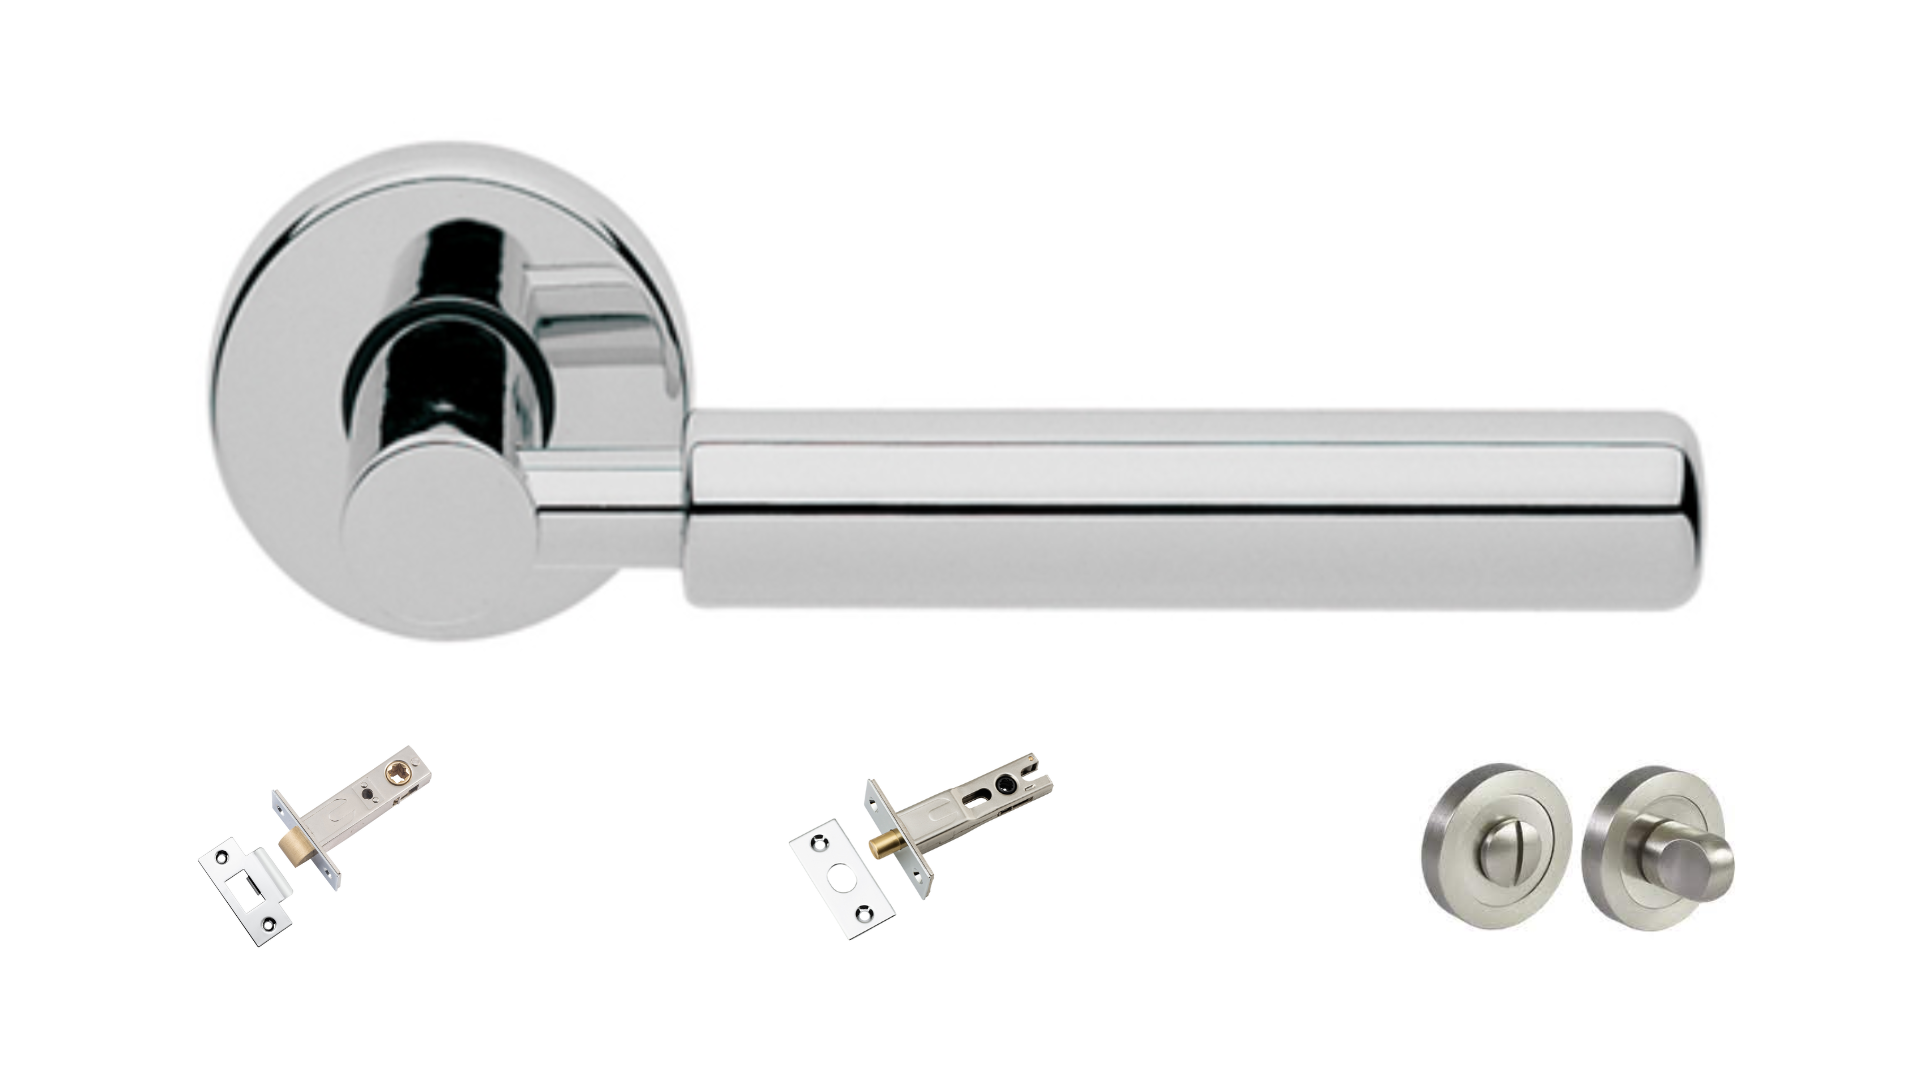 Product picture of the Amletto Polished Chrome Door Handle with accessories tubular latch, privacy turn and release, and a privacy bolt on a white background.